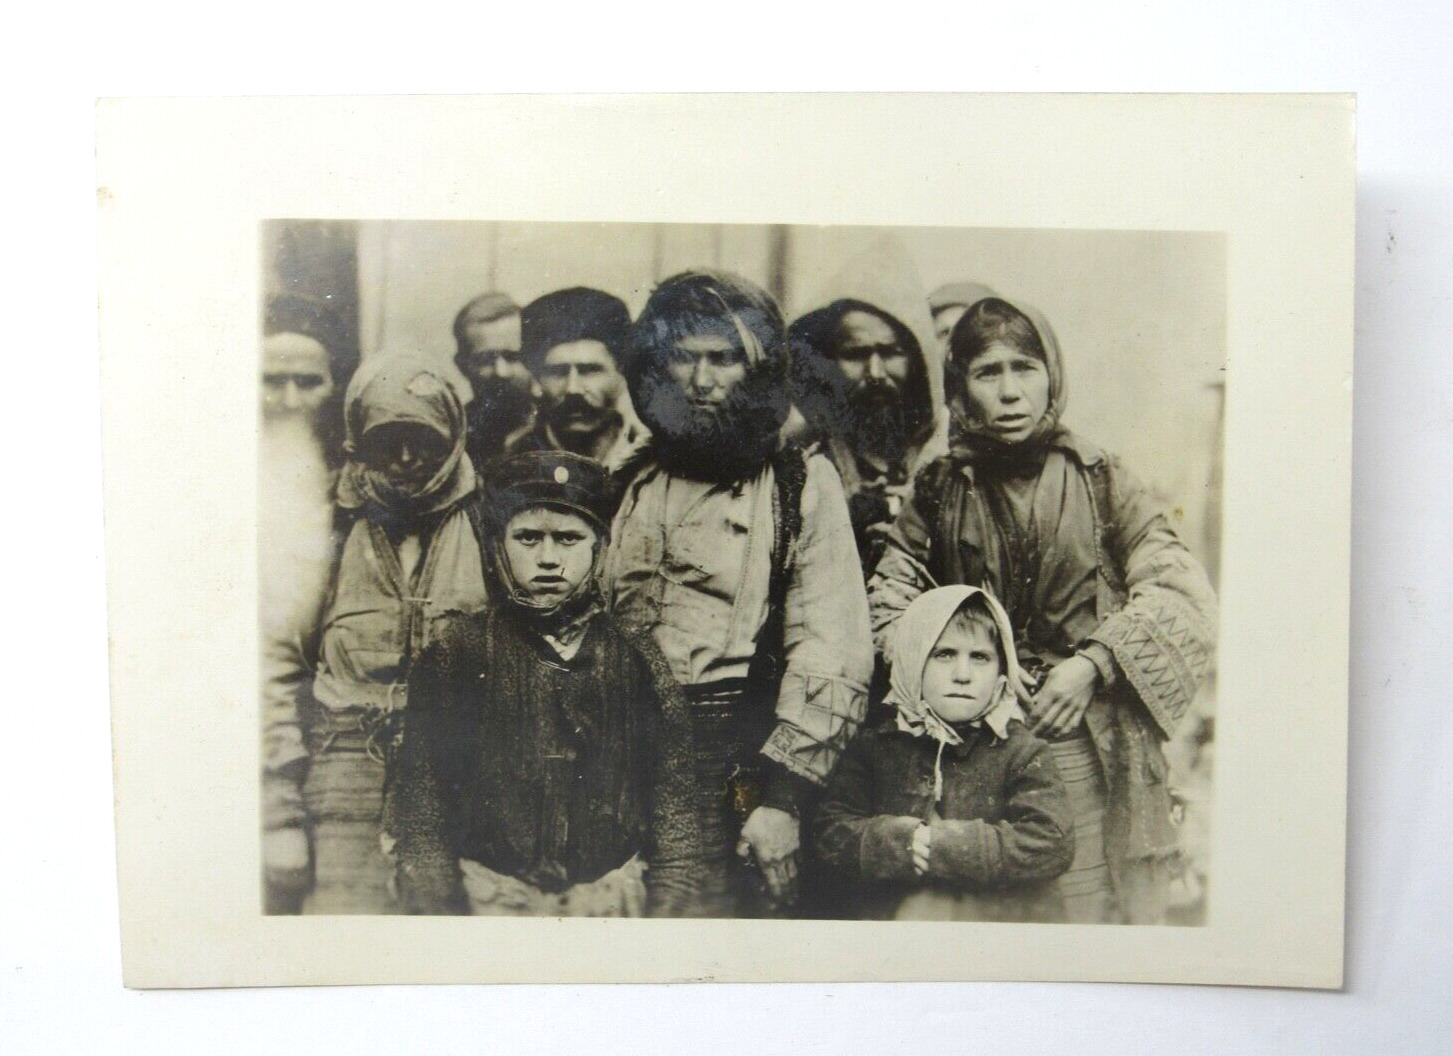 Armenian Genocide Photograph of Armenian Refugees by American Red Cross, c1920s